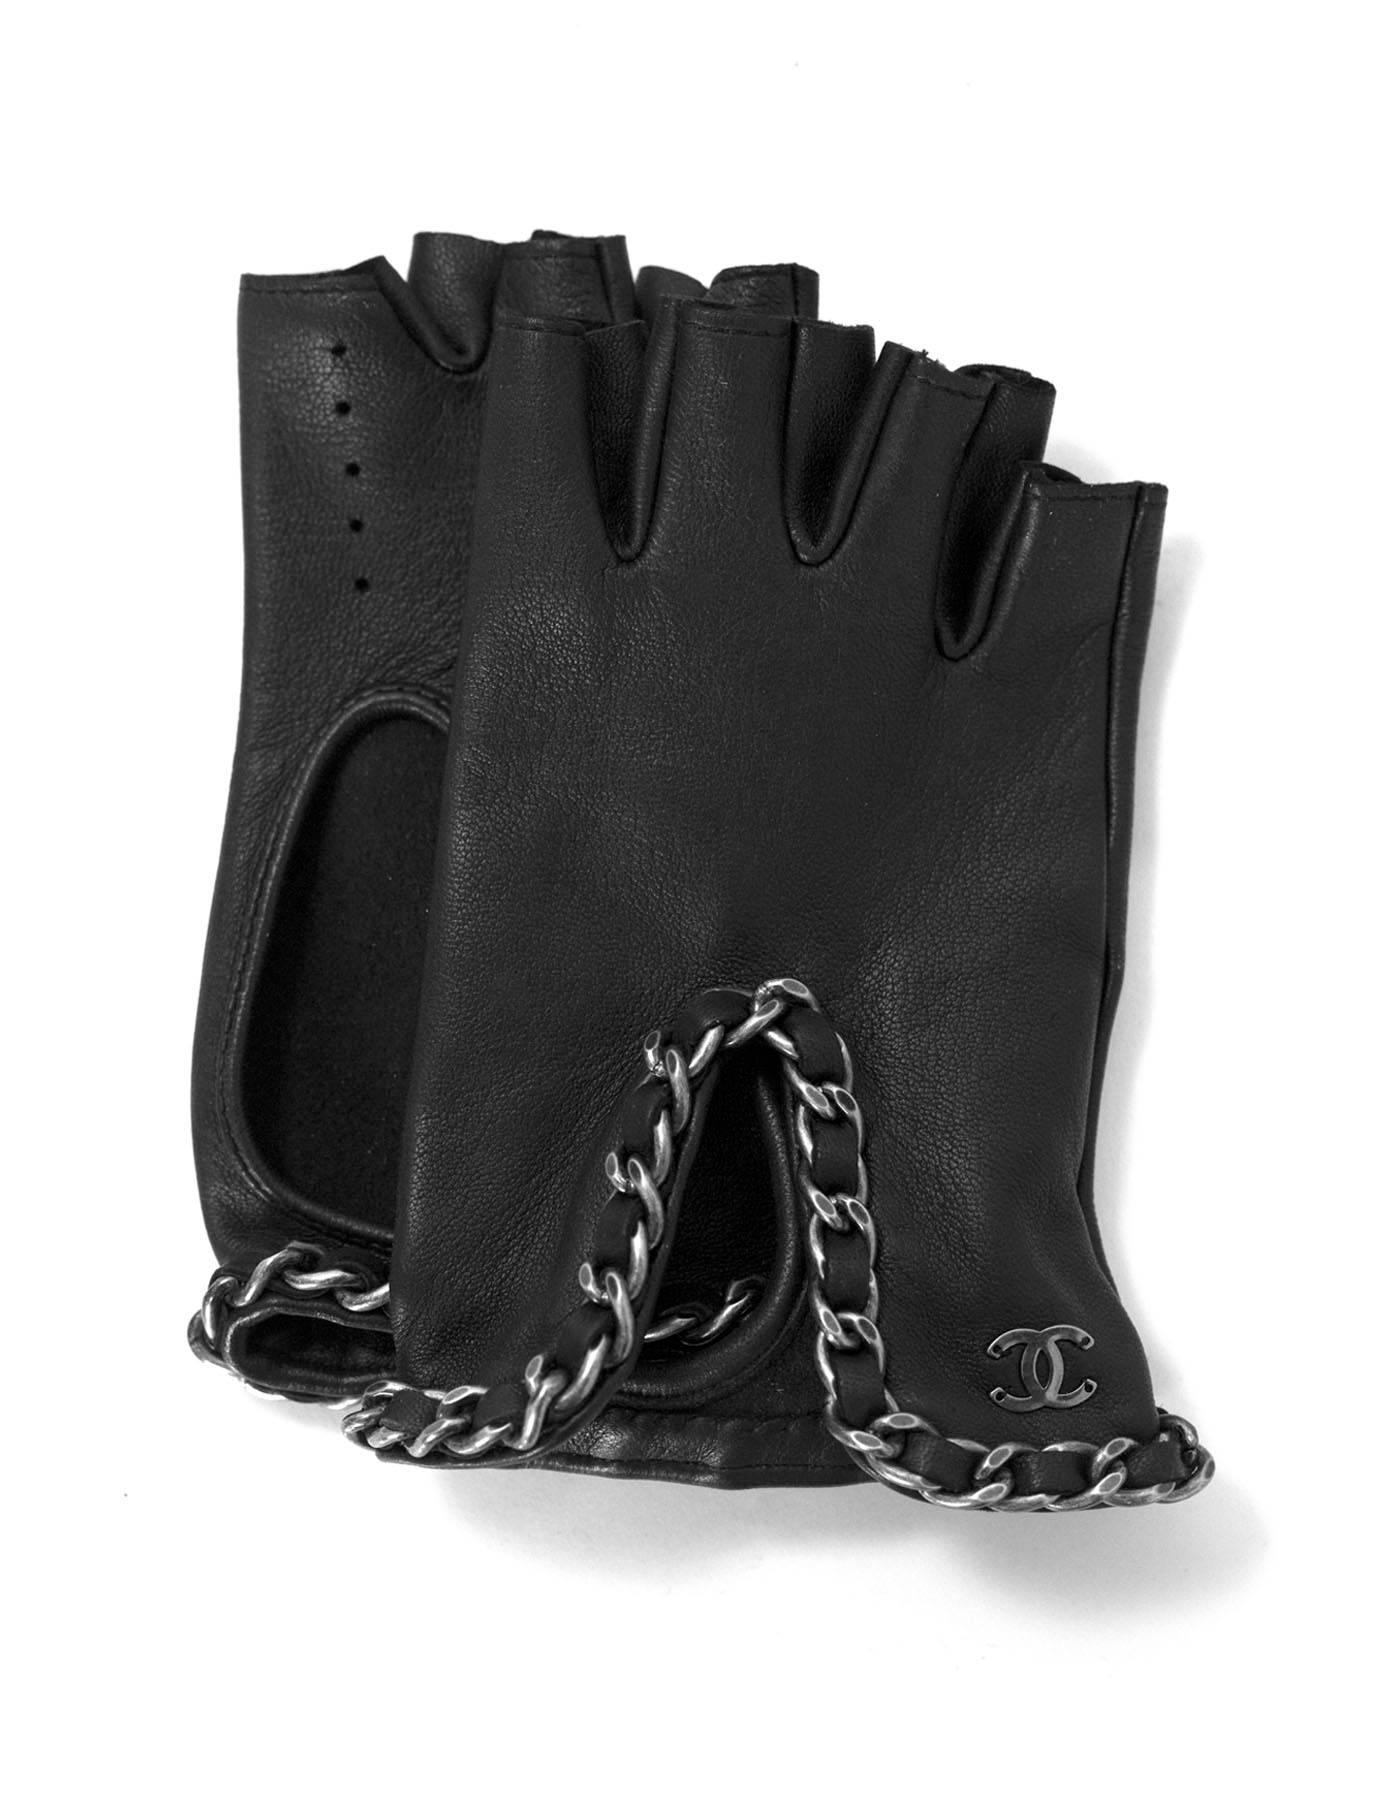 Chanel Black Leather Chain Finger-less Gloves Sz 7

Made In: France
Color: Black
Materials: Leather
Closure: None
Retail Price: $950 + tax
Overall Condition: Excellent pre-owned condition
Includes: Chanel tag
Marked Size: 7